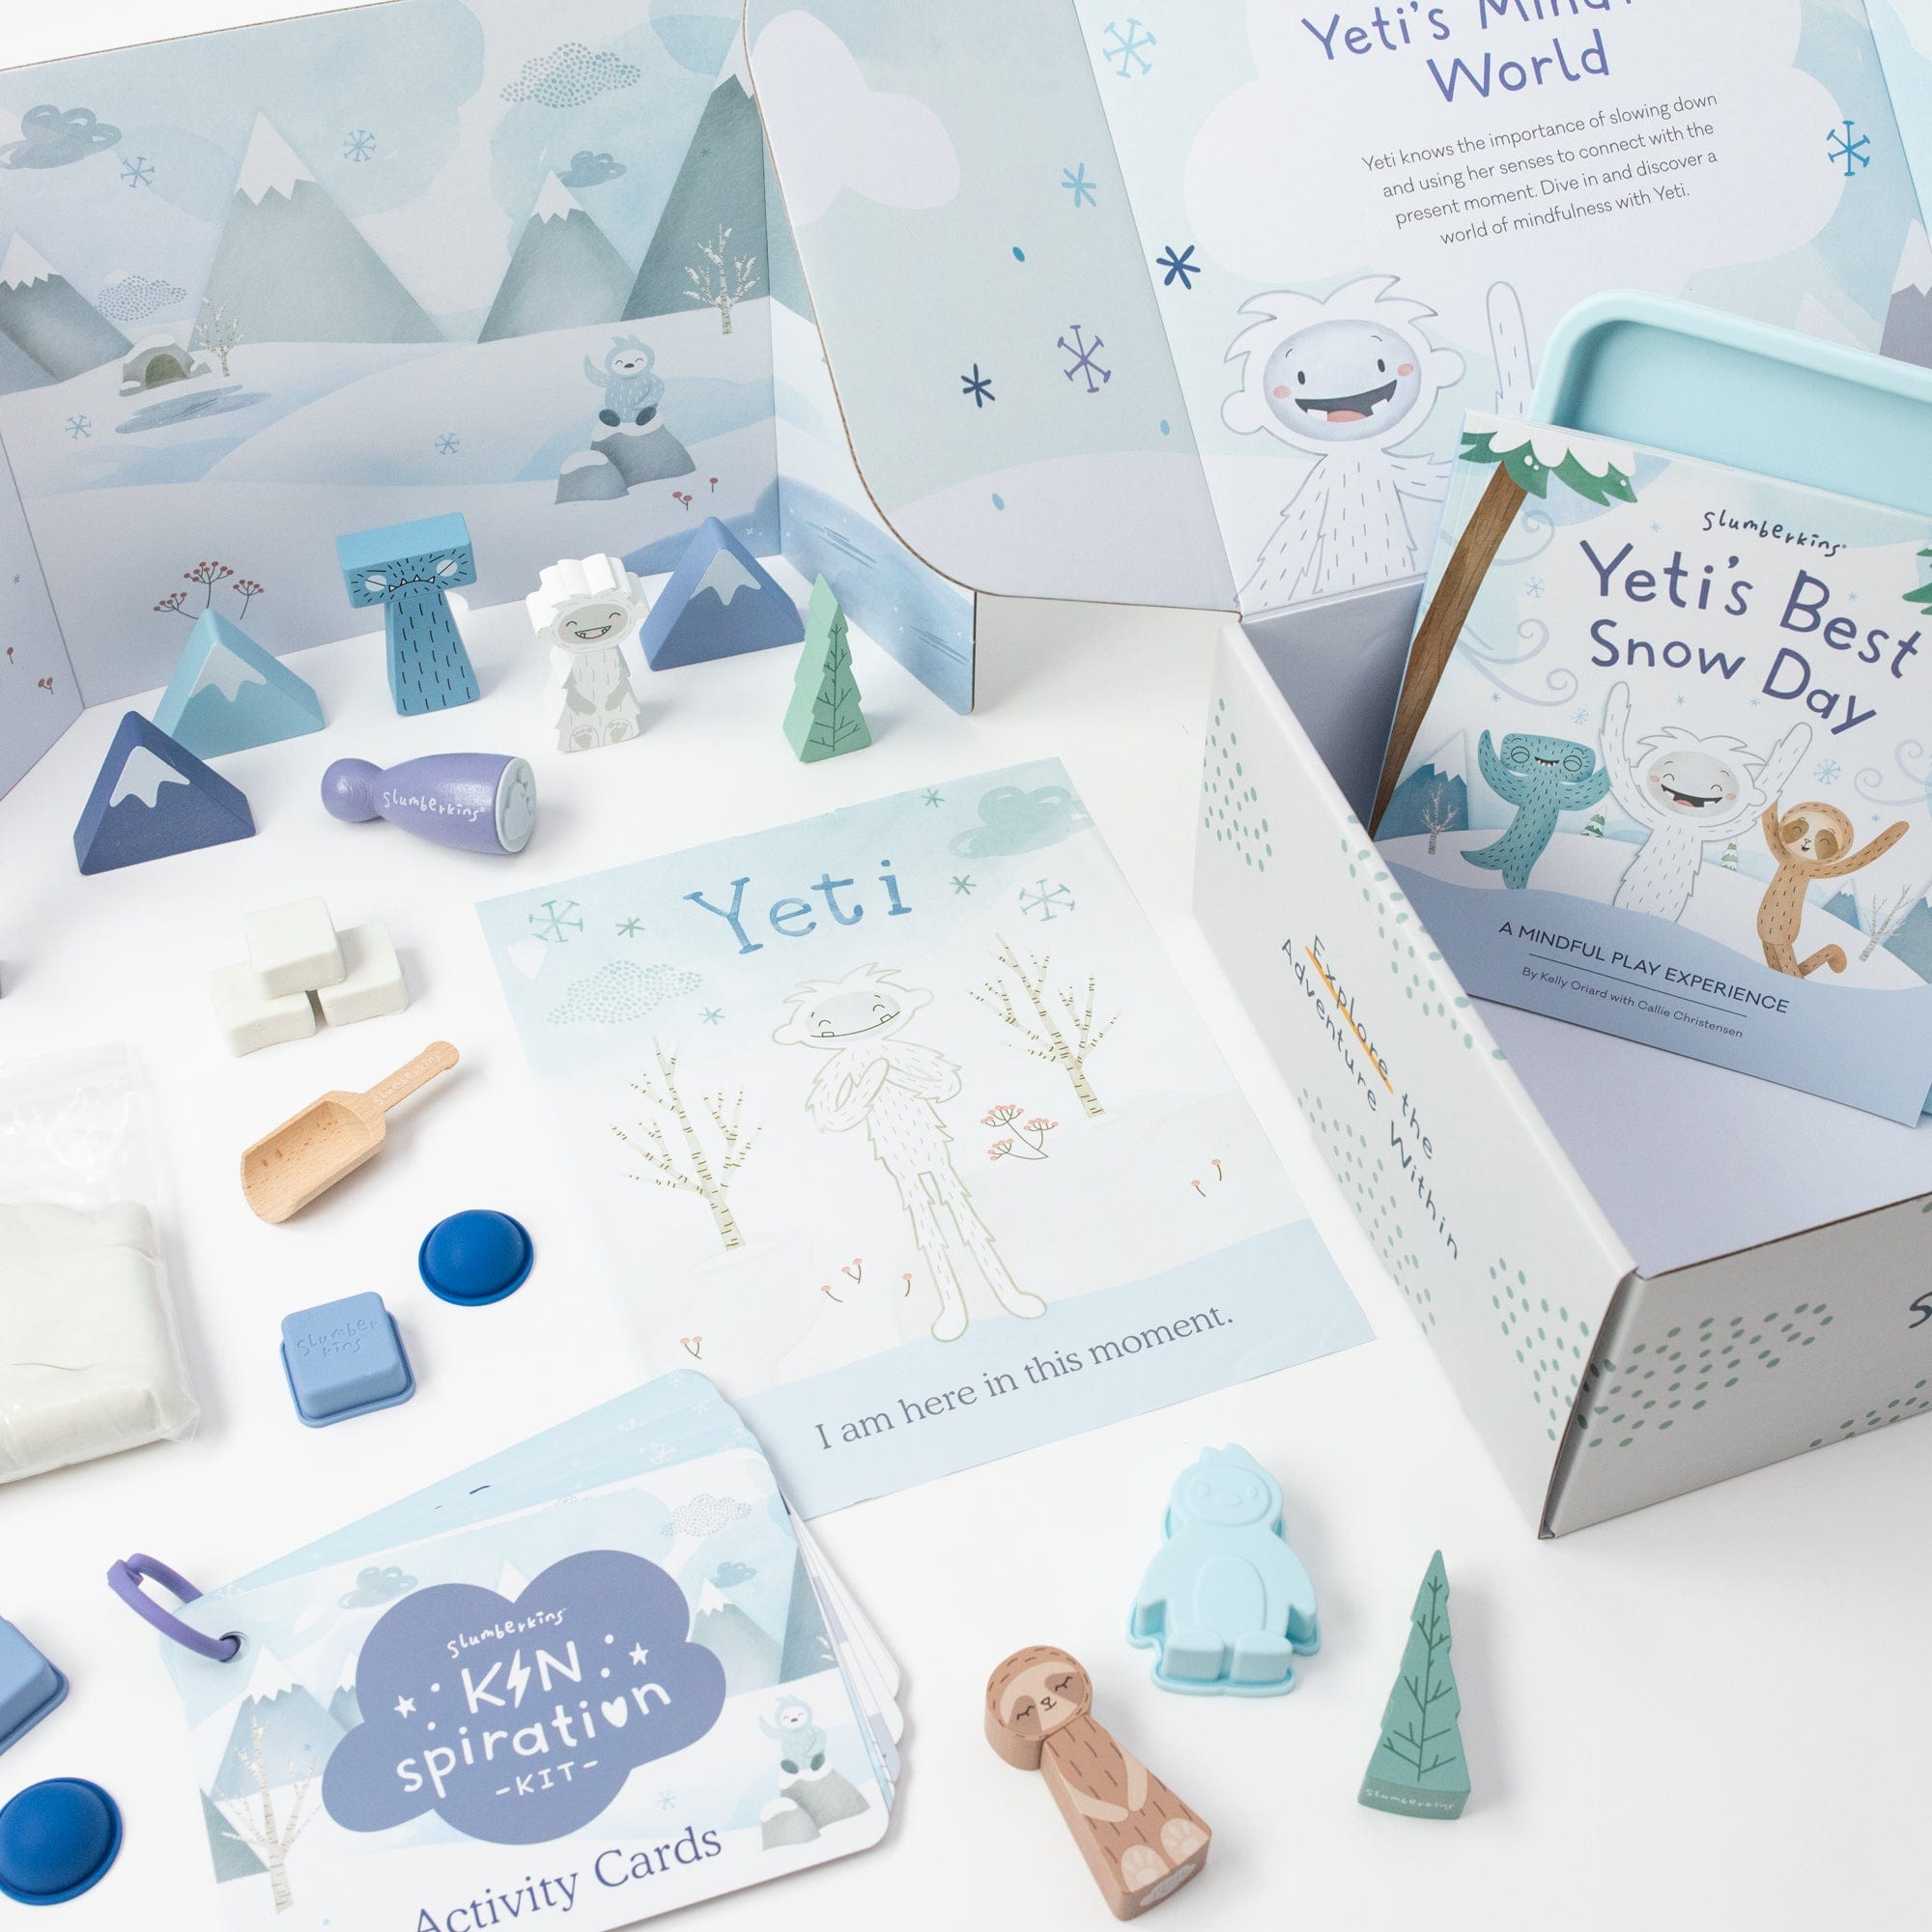 Kinspiration Kit: Mindful Play with Yeti - View Product